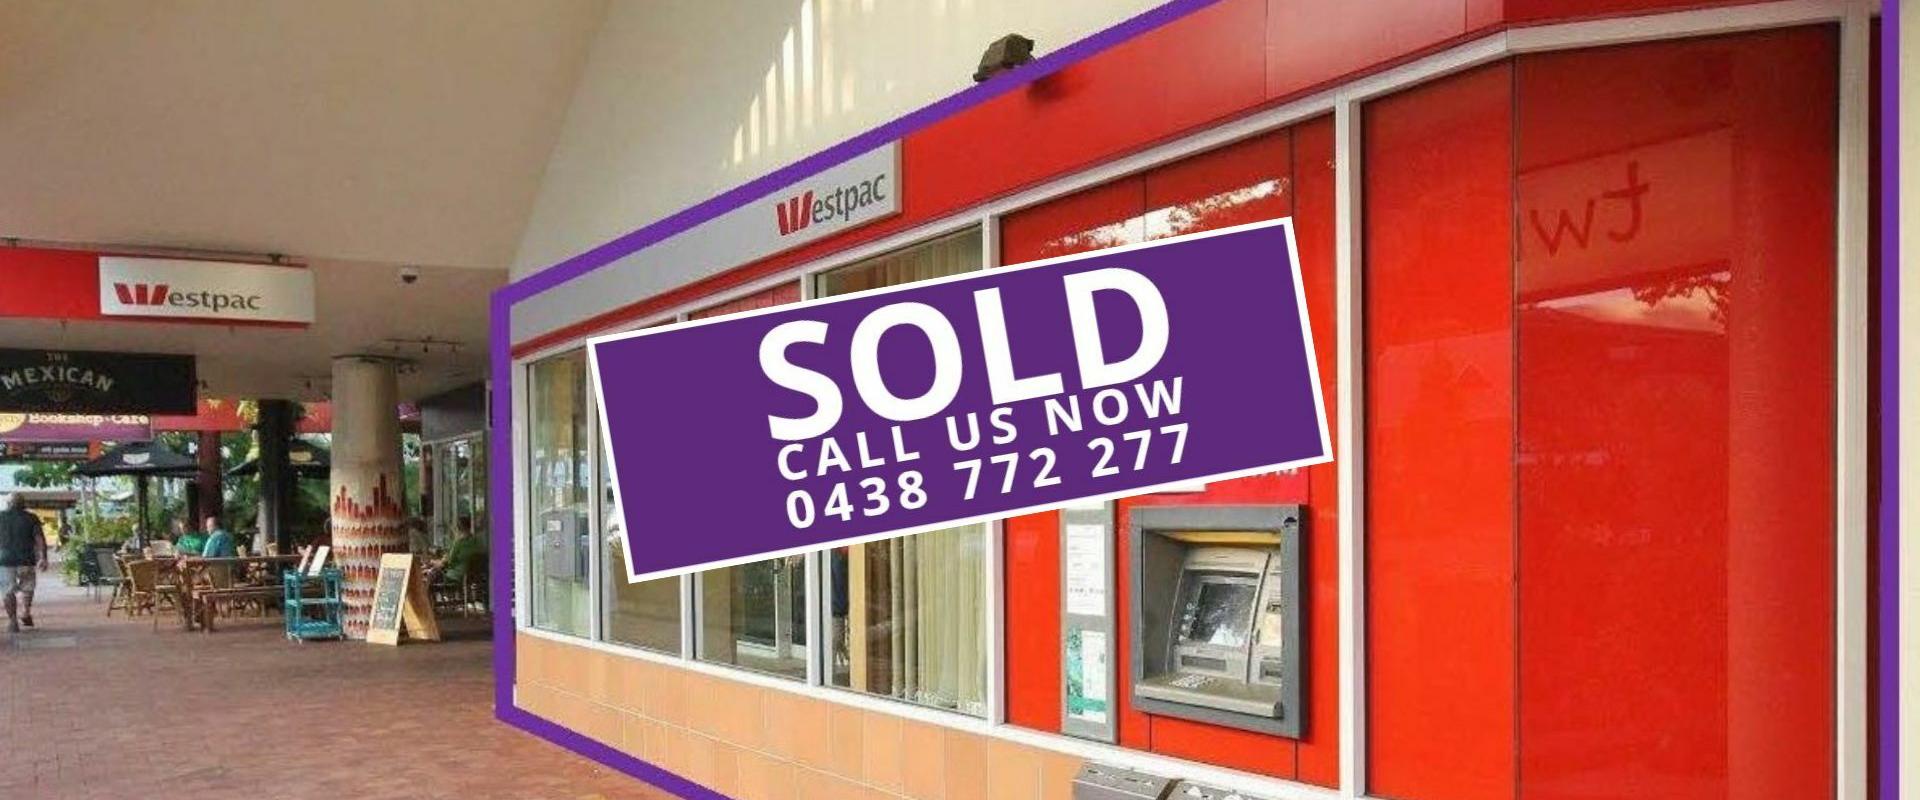 Commercial Premises SOLD by Tony McGrath Real Estate